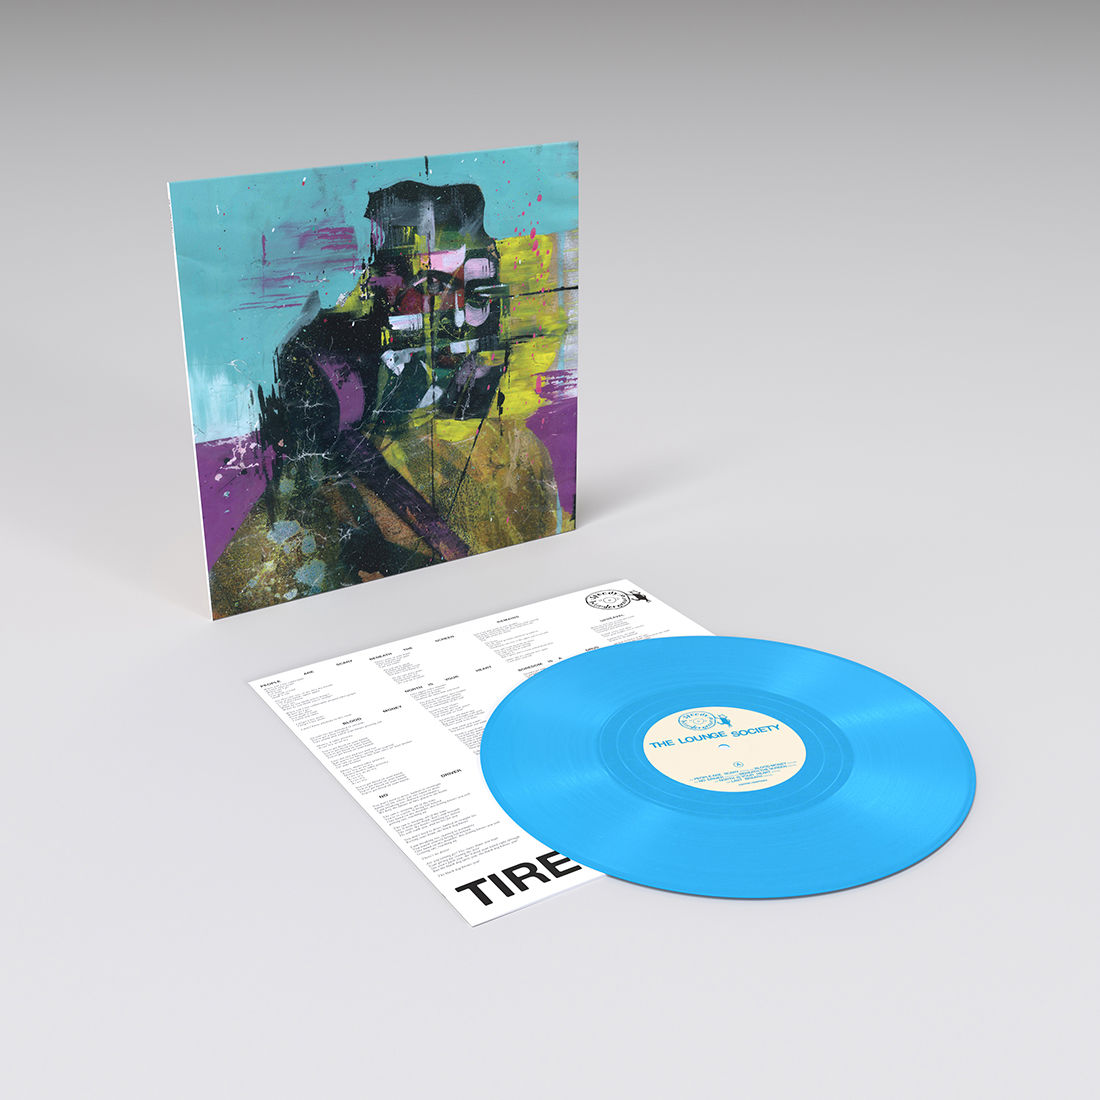 Tired of Liberty: Limited Sky Blue Vinyl LP